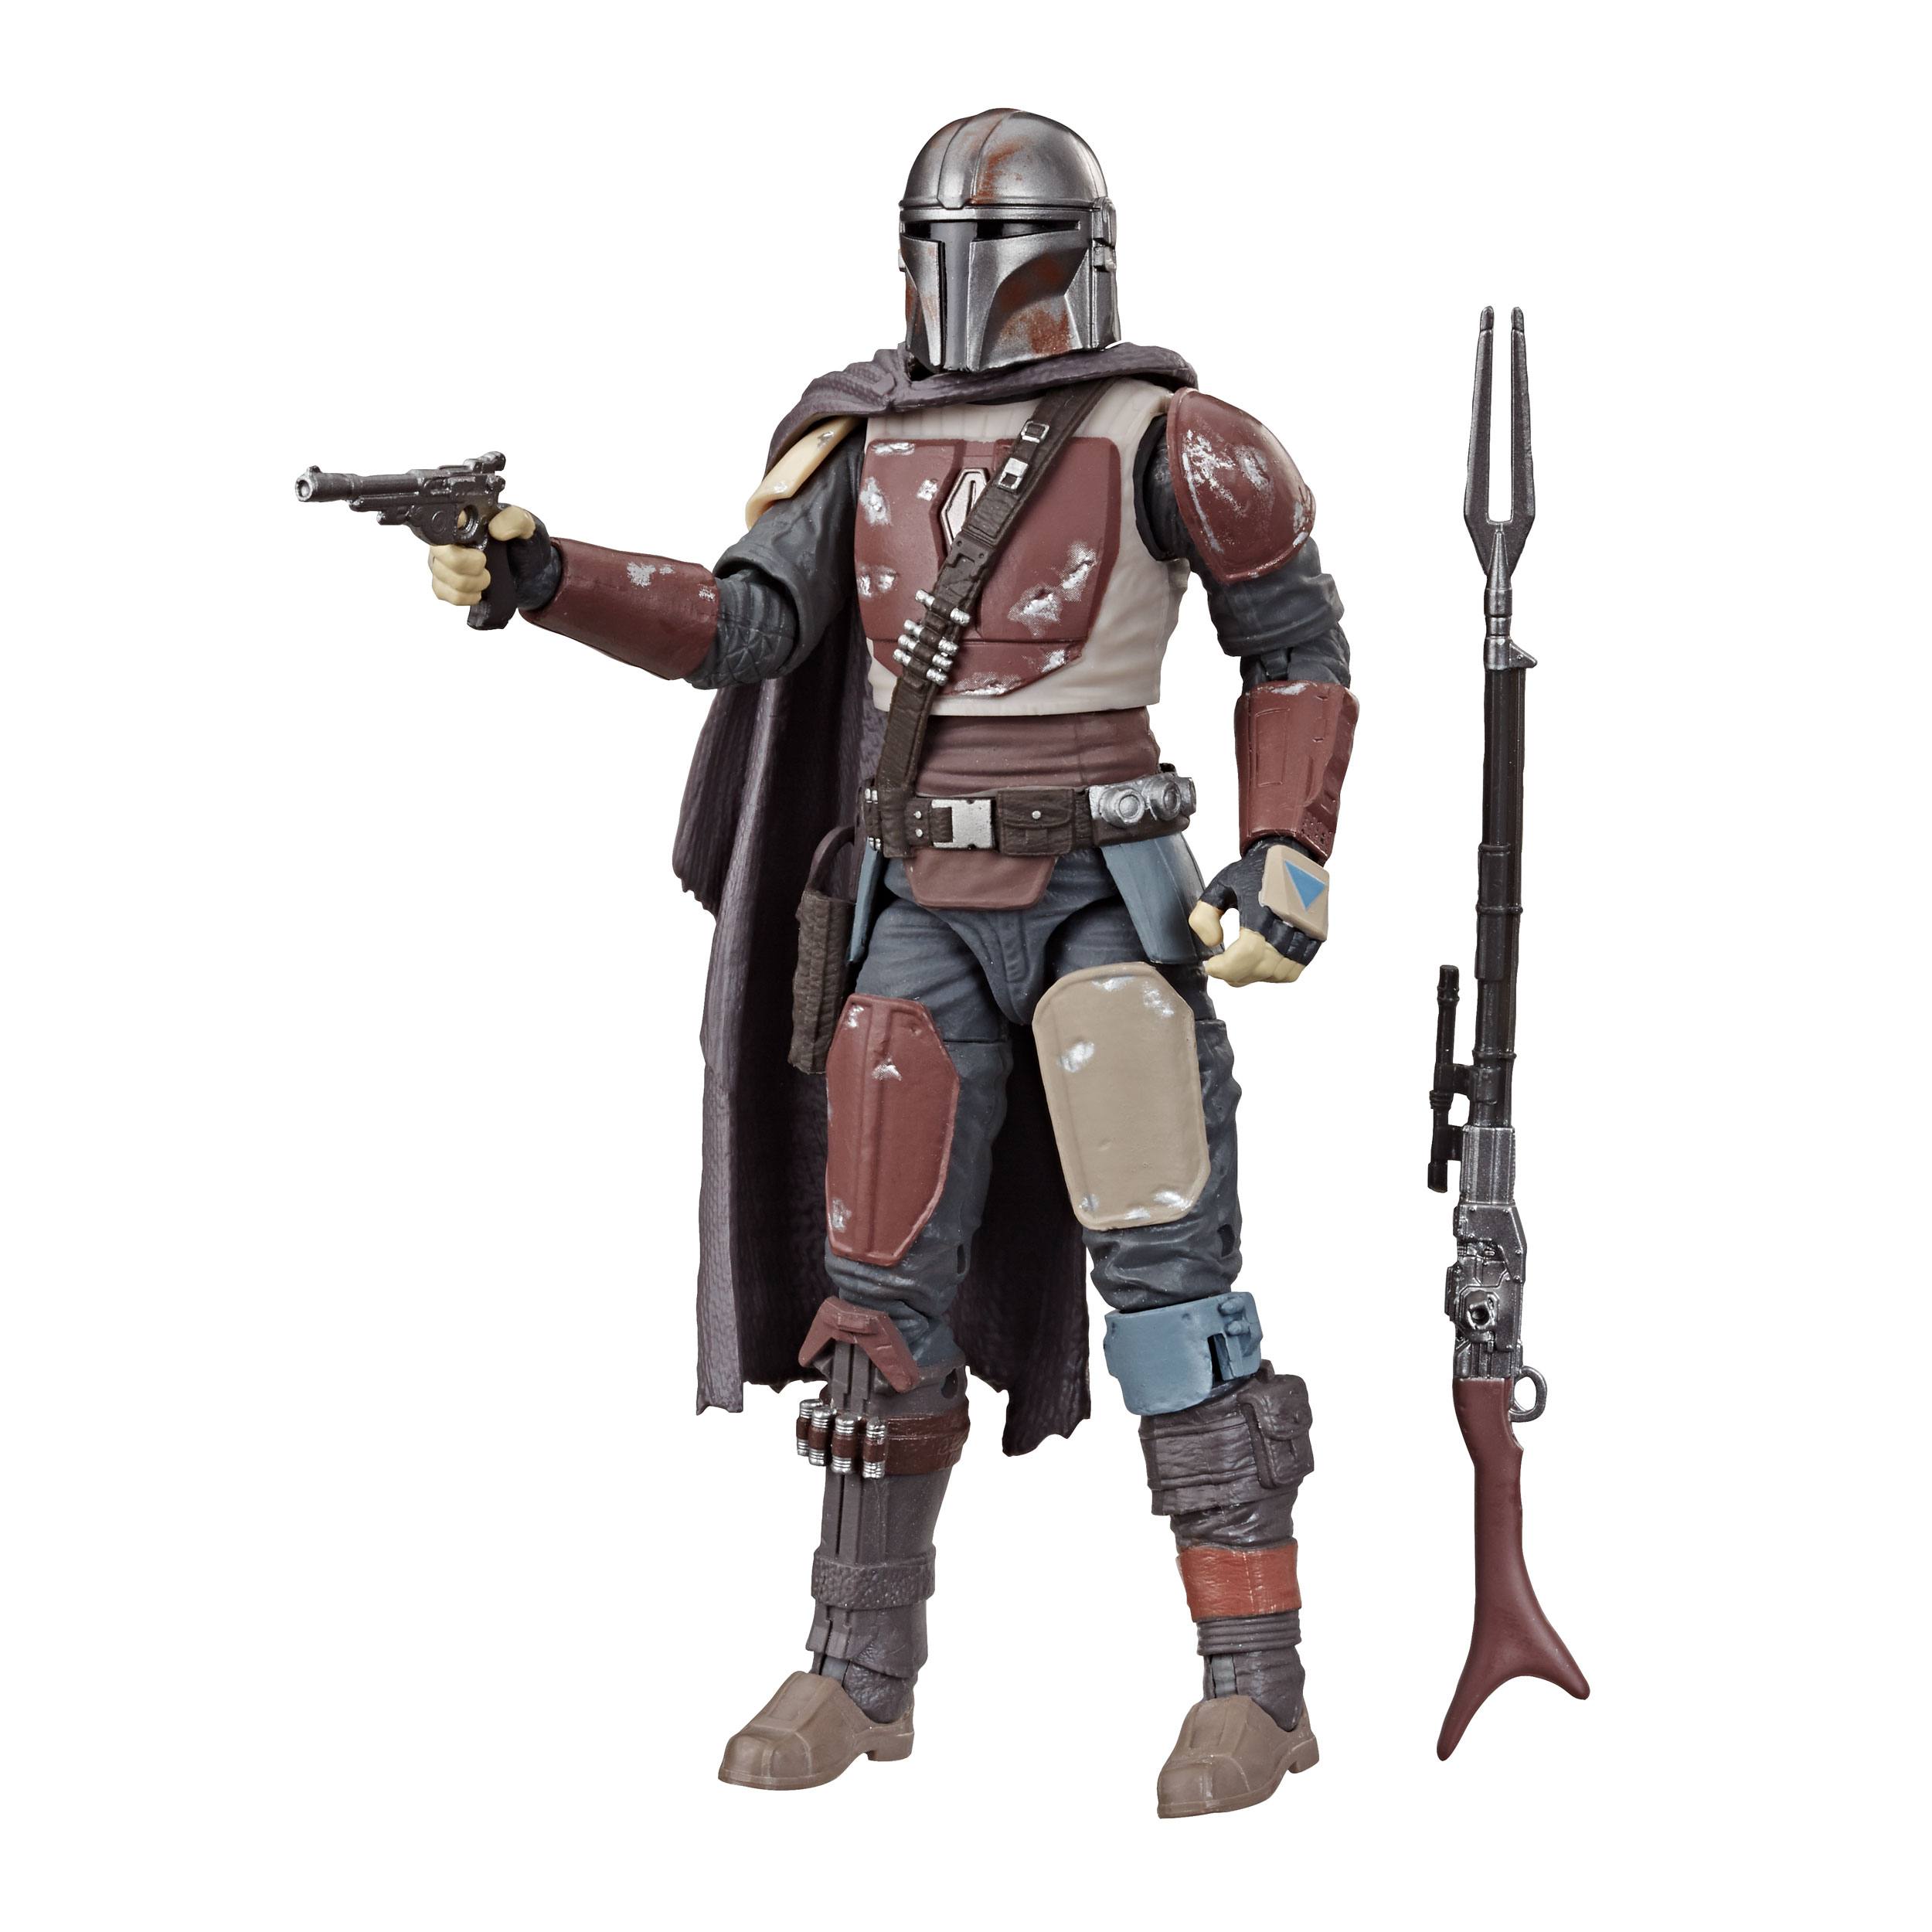 Star Wars The Black Series The Mandalorian Toy 6-inch Scale Collectible Action Figure E6959ES00 5010993622153